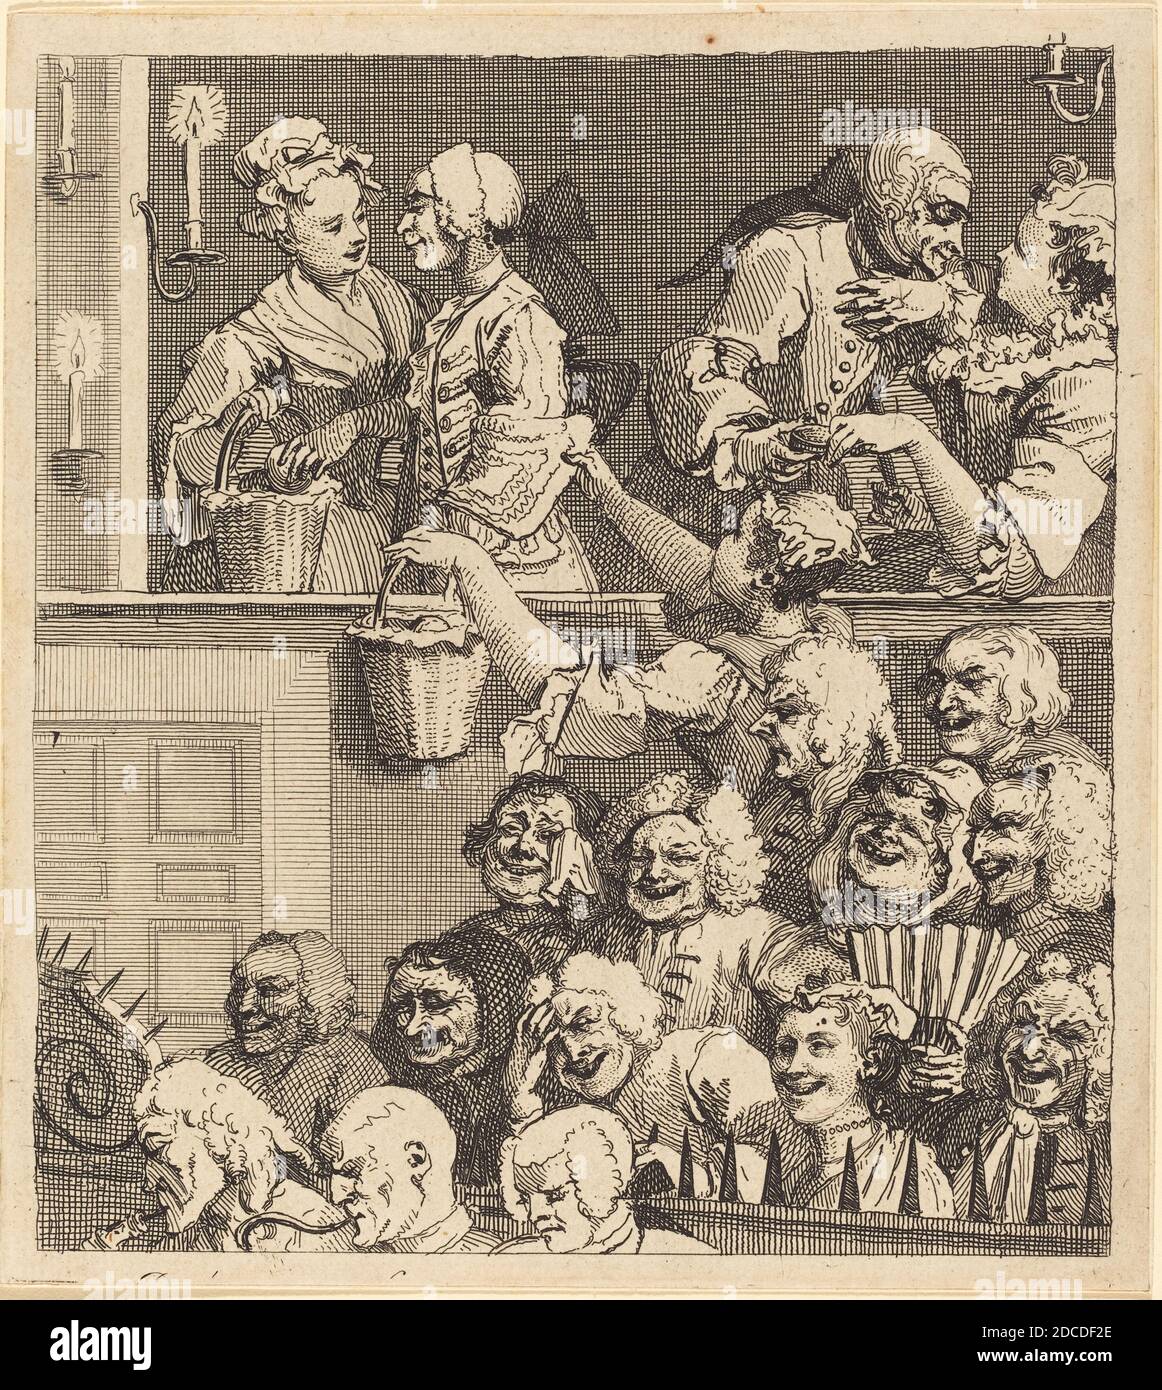 William Hogarth, (artista), inglese, 1697 - 1764, The Laughing Audience, 1733, Etching Foto Stock